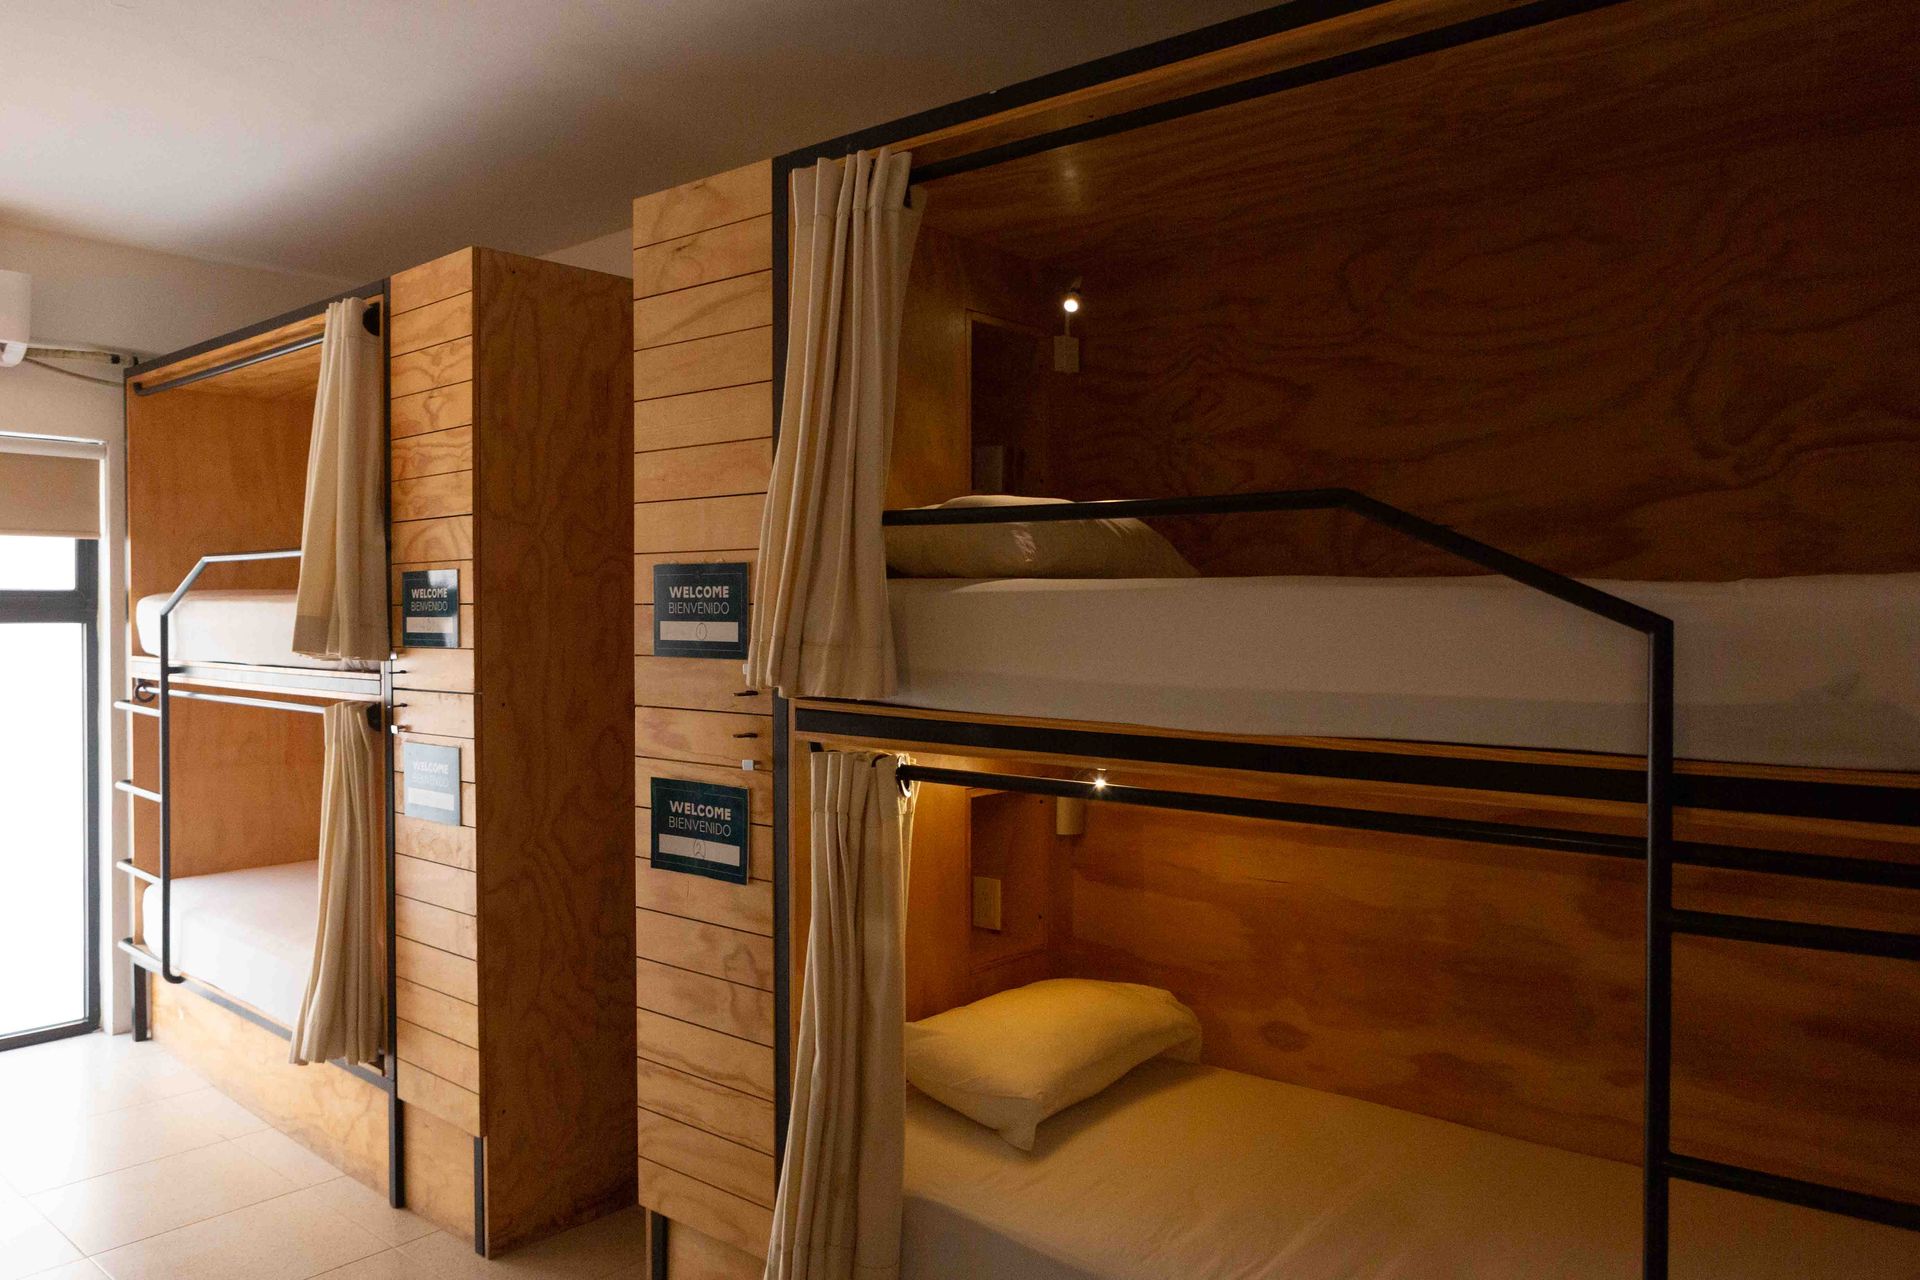 A row of bunk beds in a room with a window